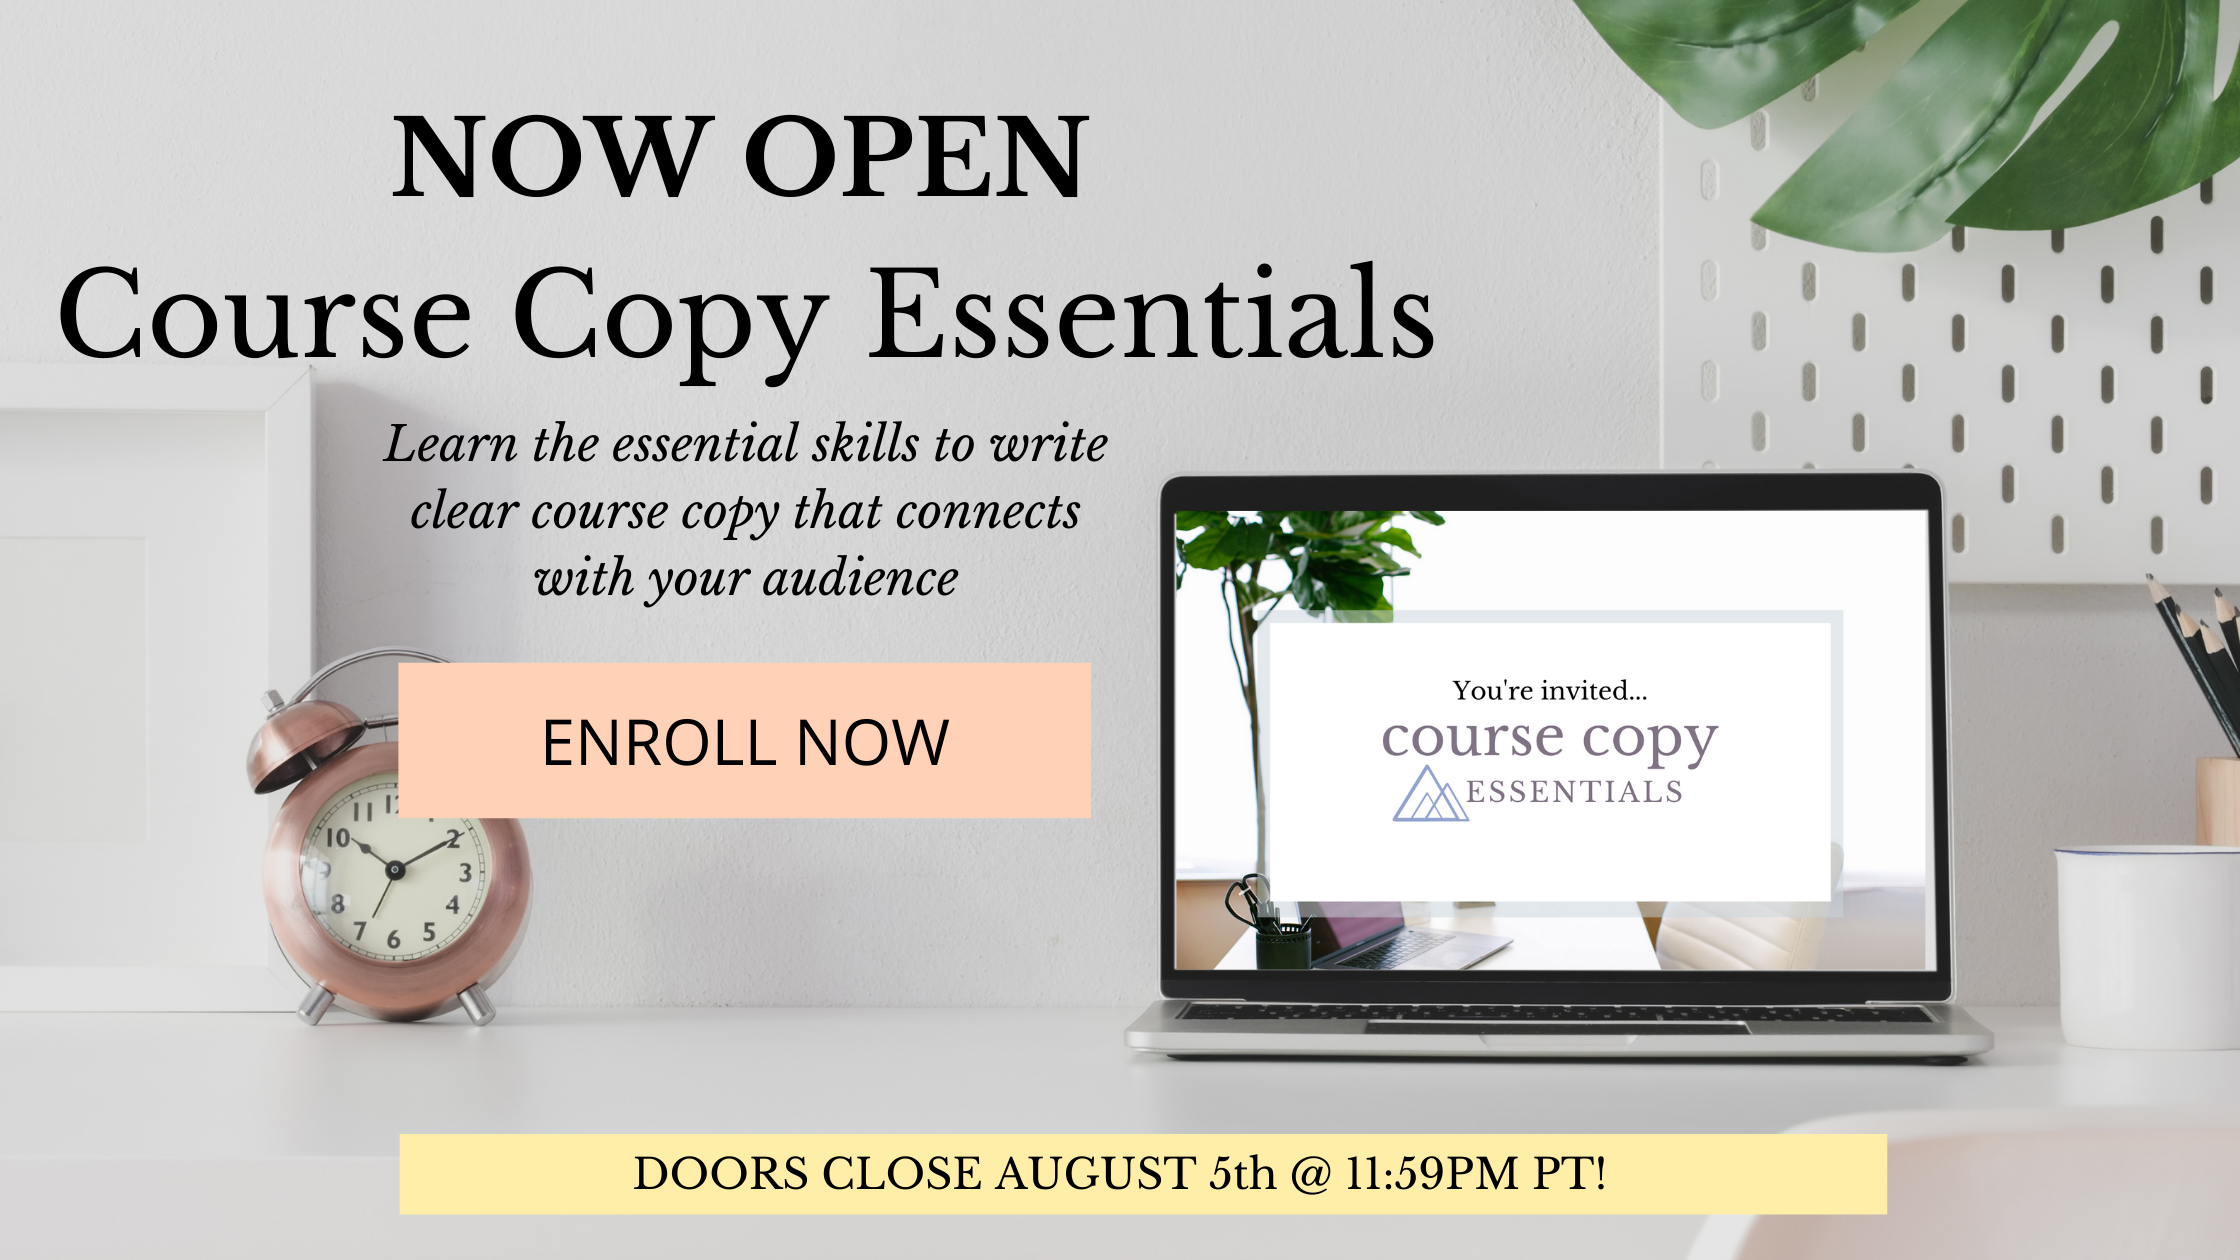 Join Course Copy Essentials